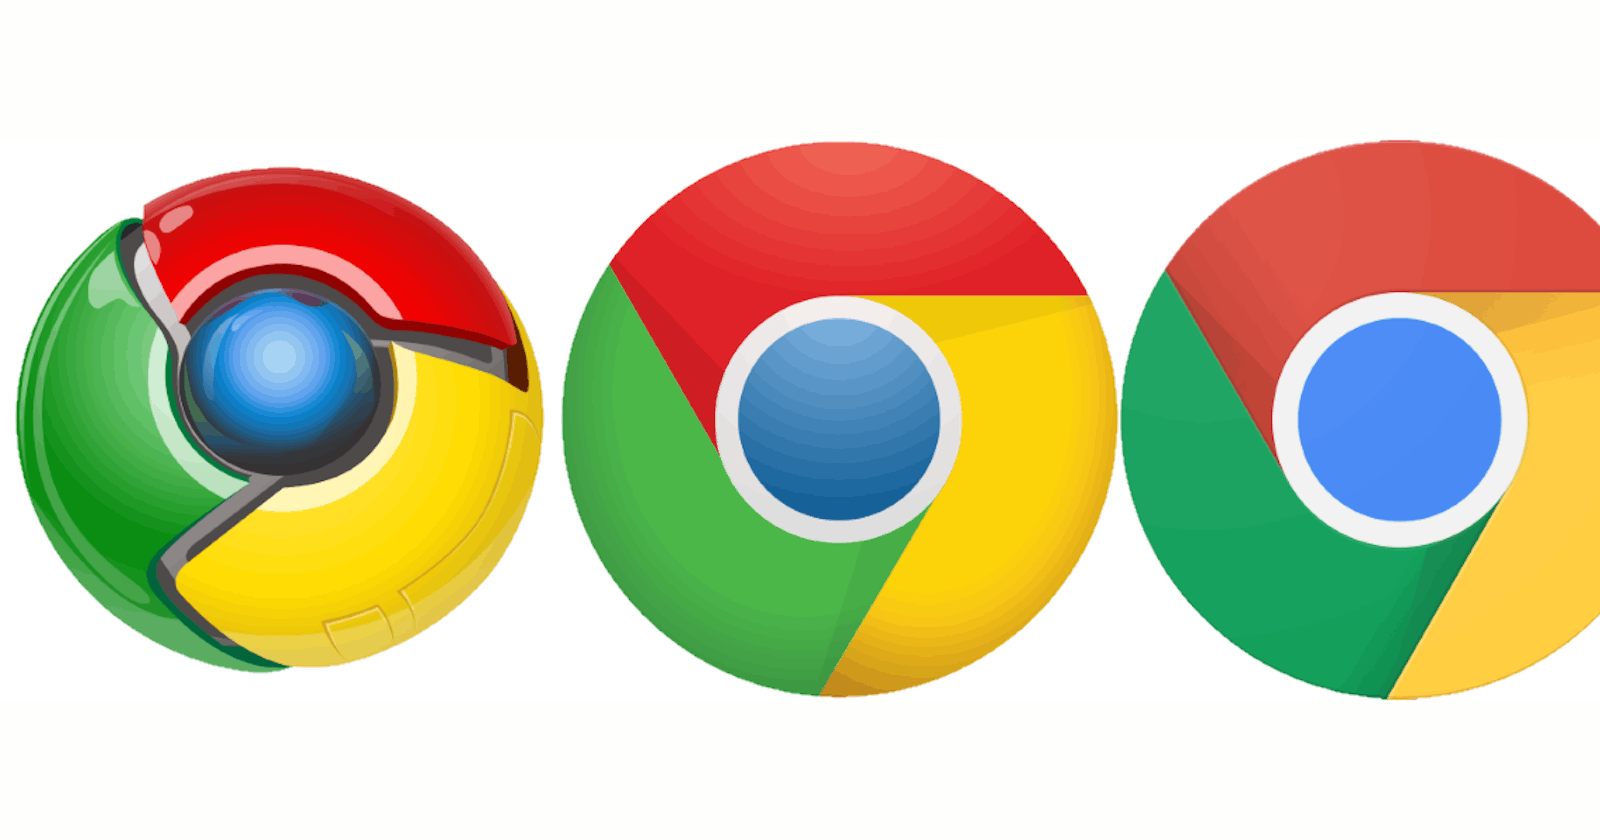 8 Best Google Chrome Extensions for Web Designers And Developers in 2021